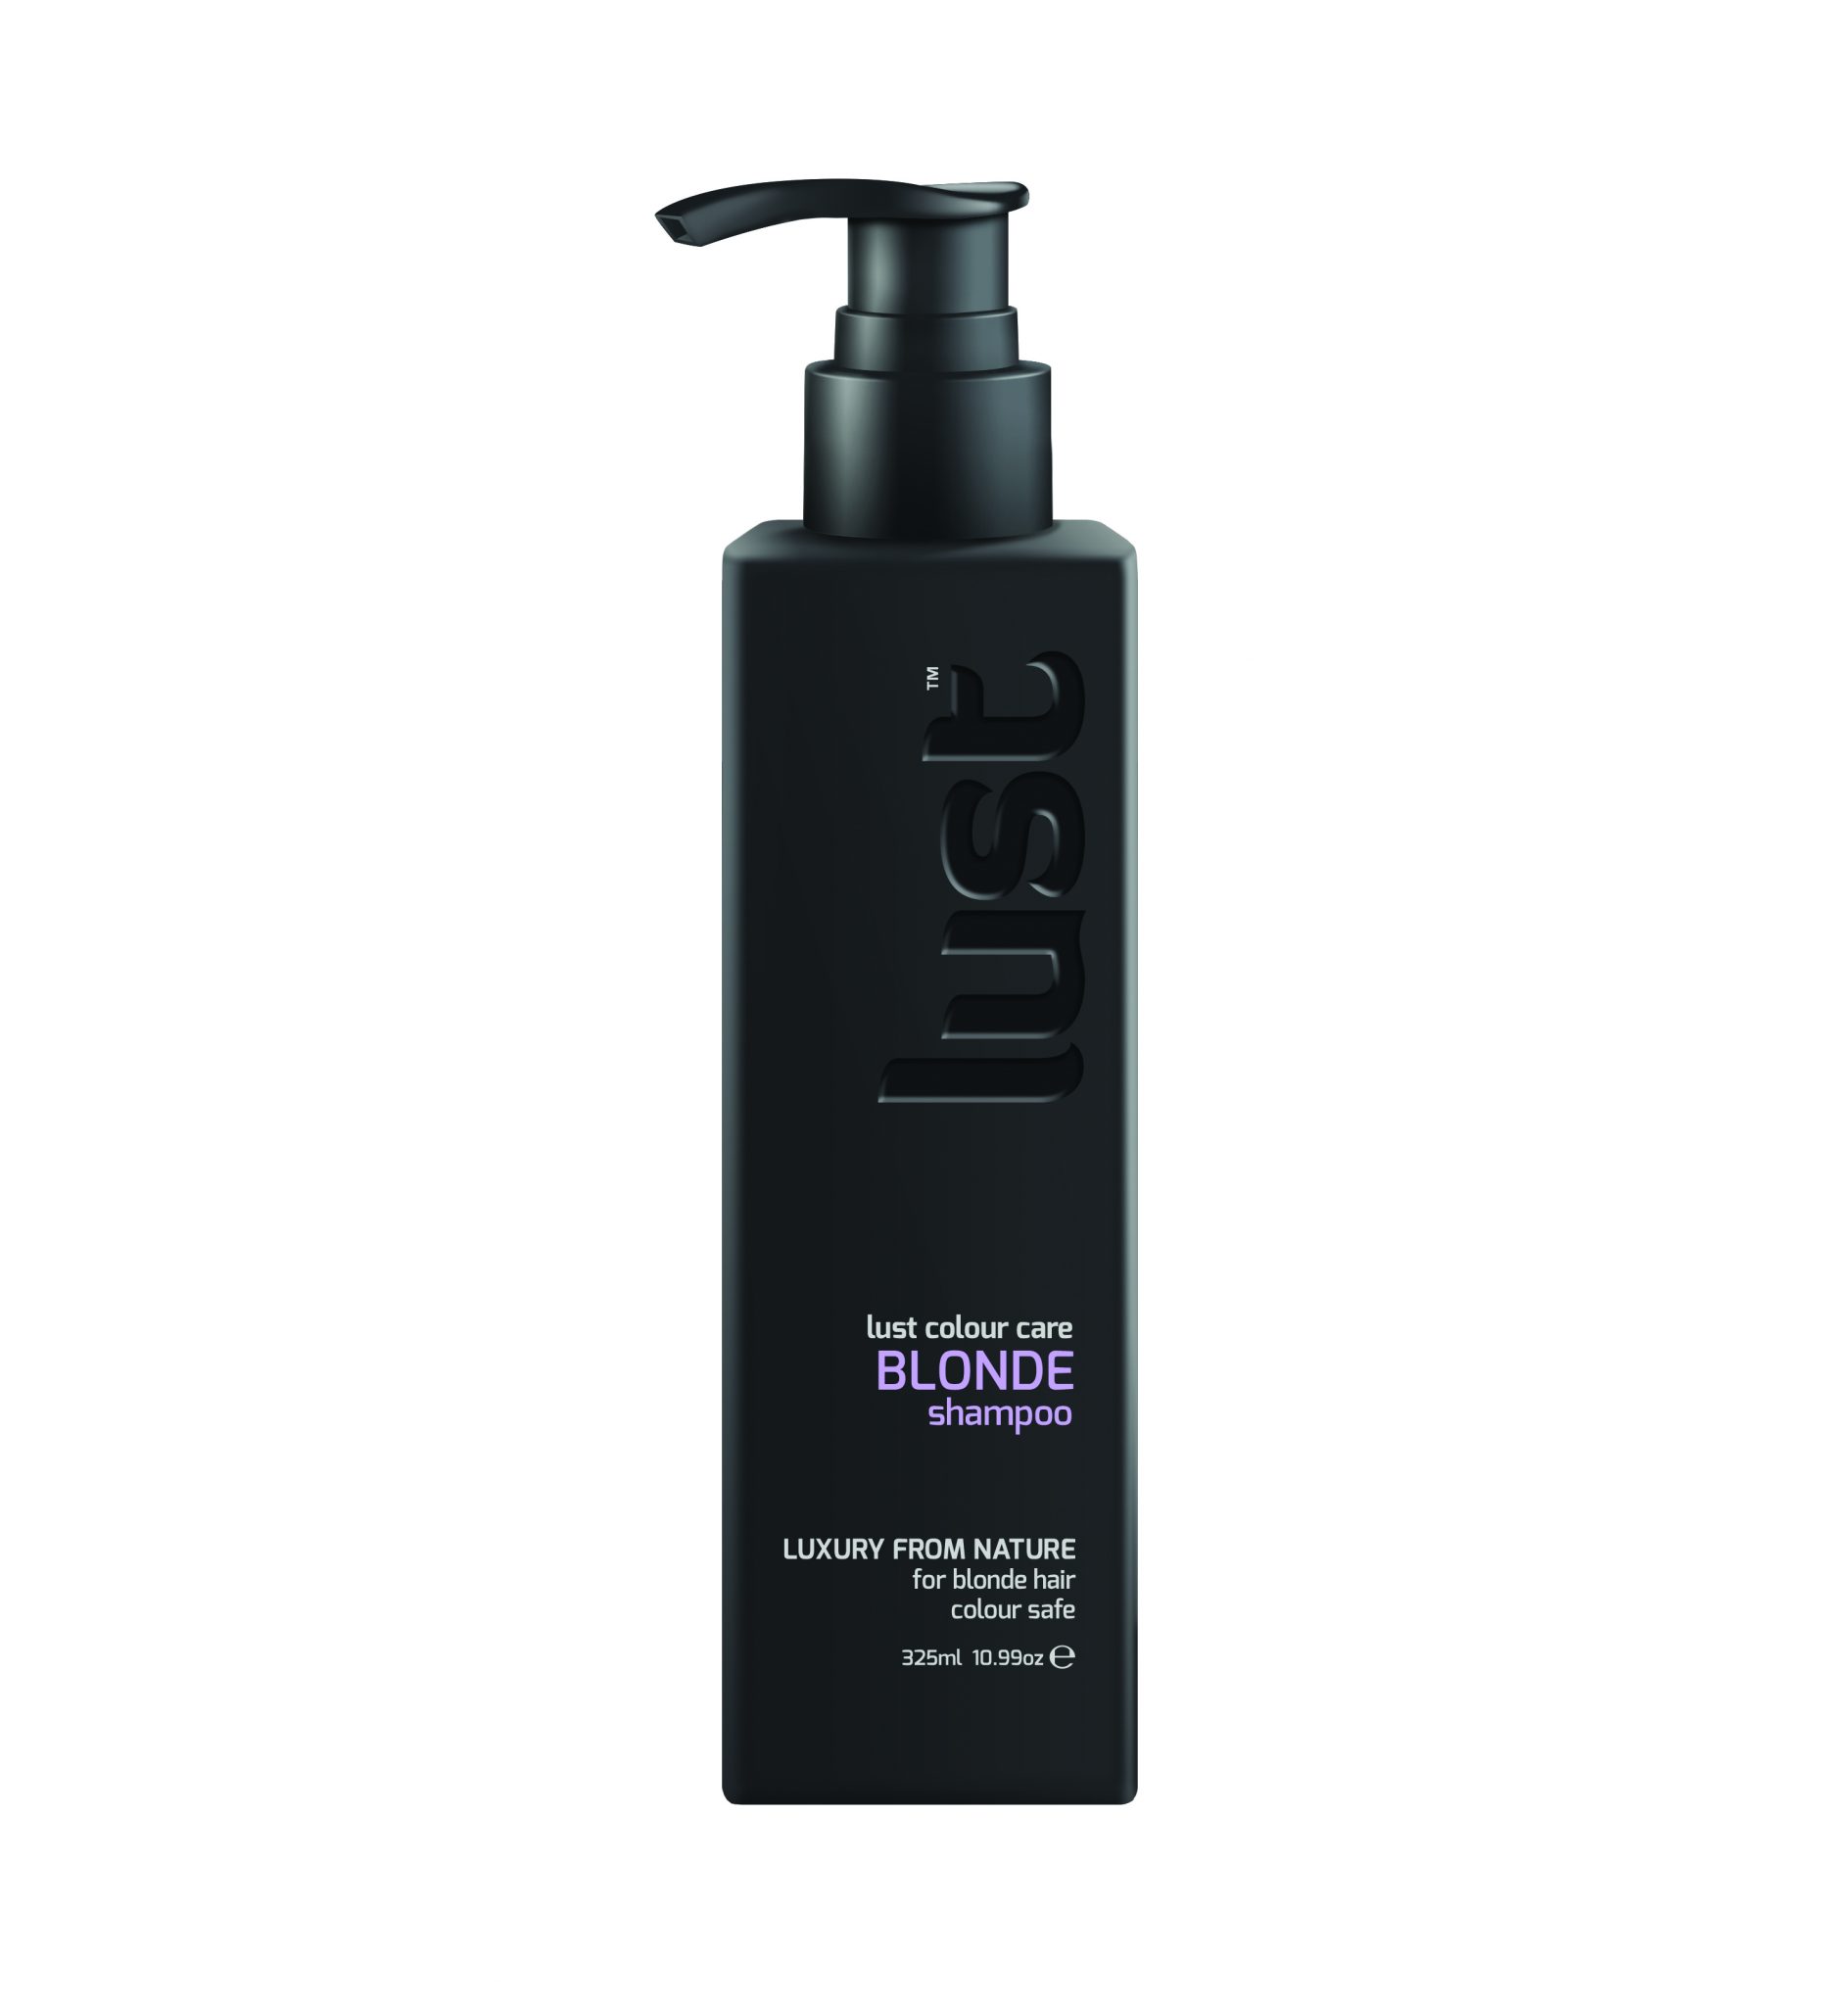 Lust Blonde 325ml Hair products New Zealand | Nation wide hairdressing & hair care group